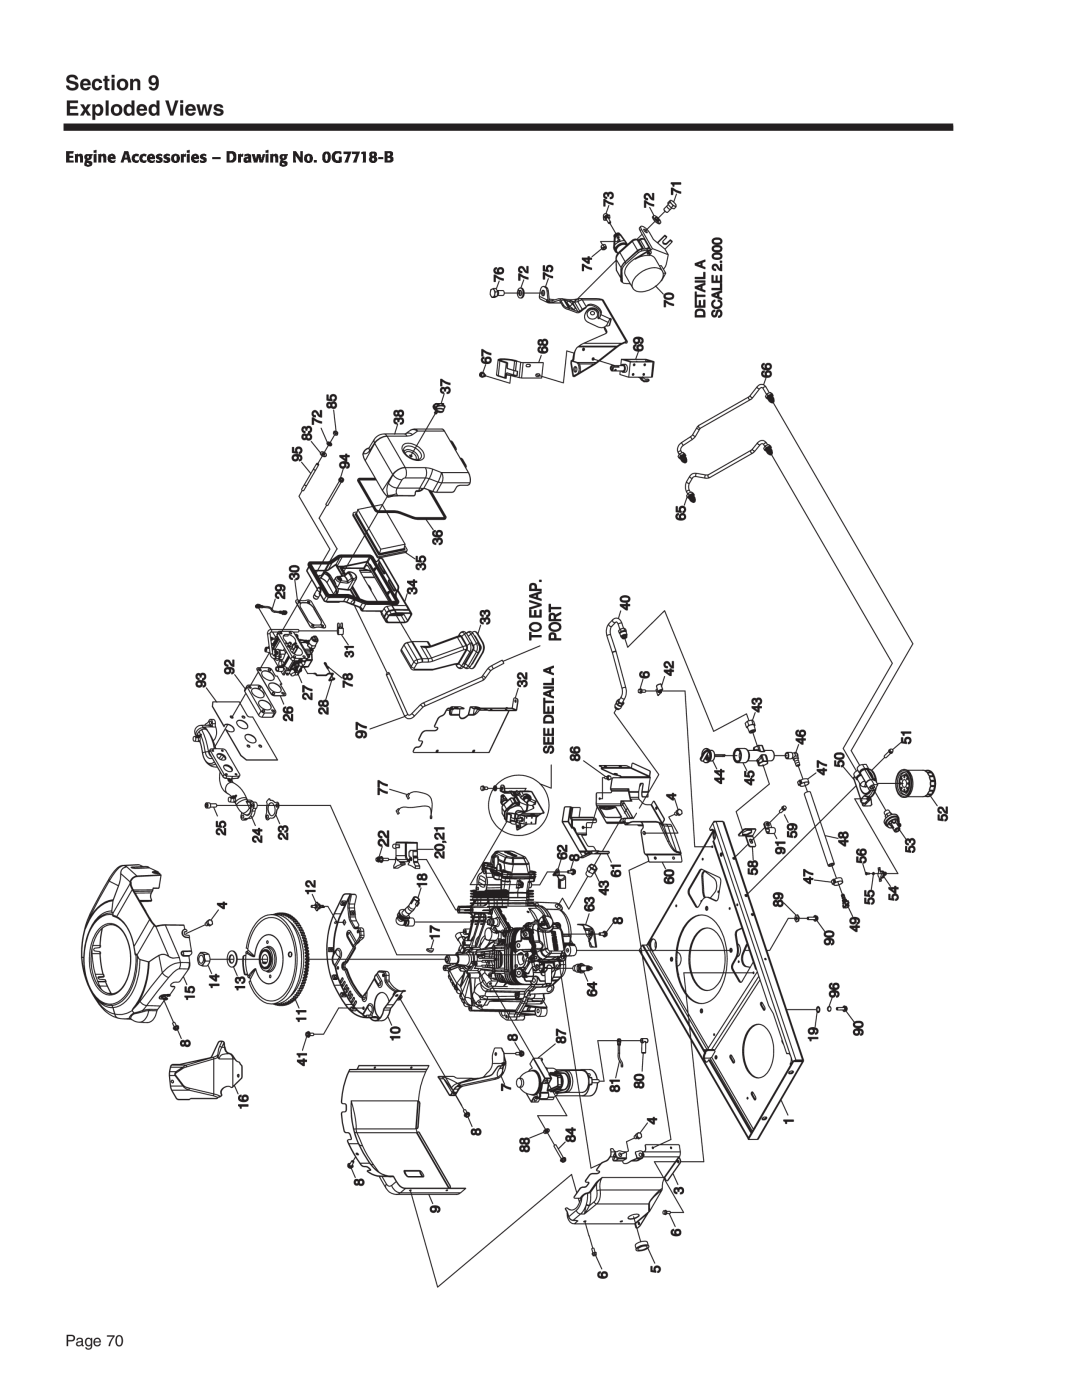 Generac Power Systems 5412, 5411, 5413, 5415, 5414, 5410 Section Exploded Views, Engine Accessories - Drawing No. 0G7718-B 